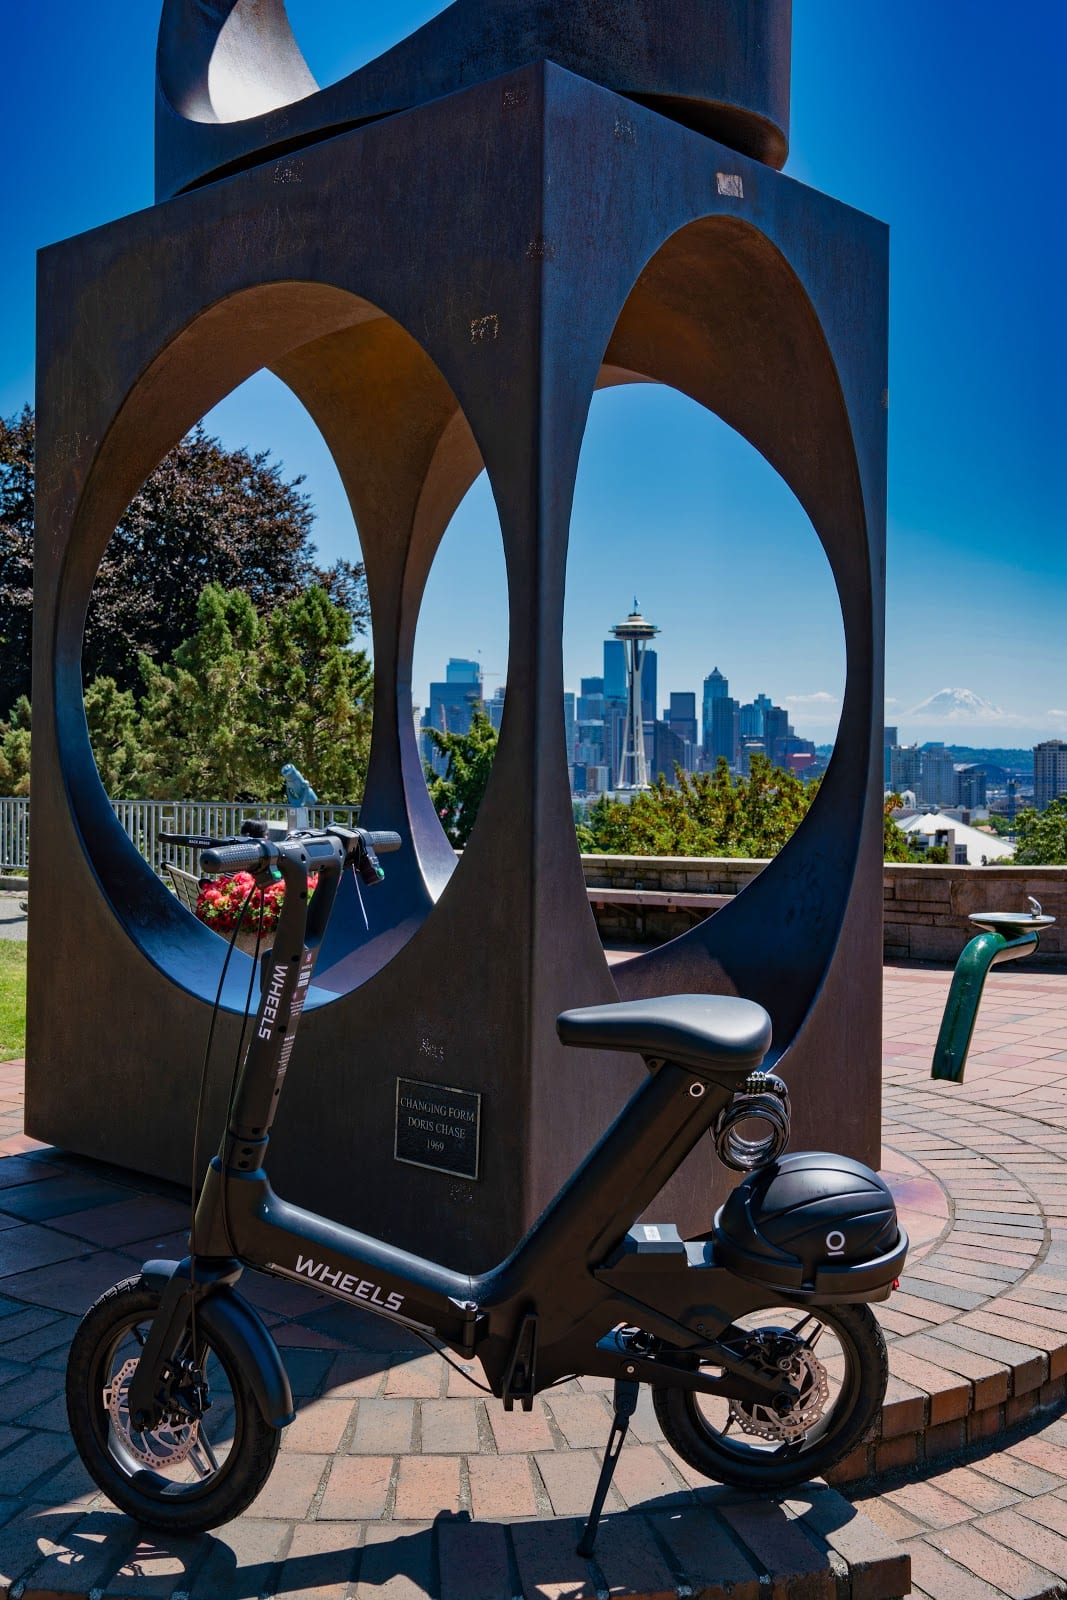 Wheels scooter in front of a sculpture on a sunny day in Seattle. Downtown and the Space Needle can be seen in the background.